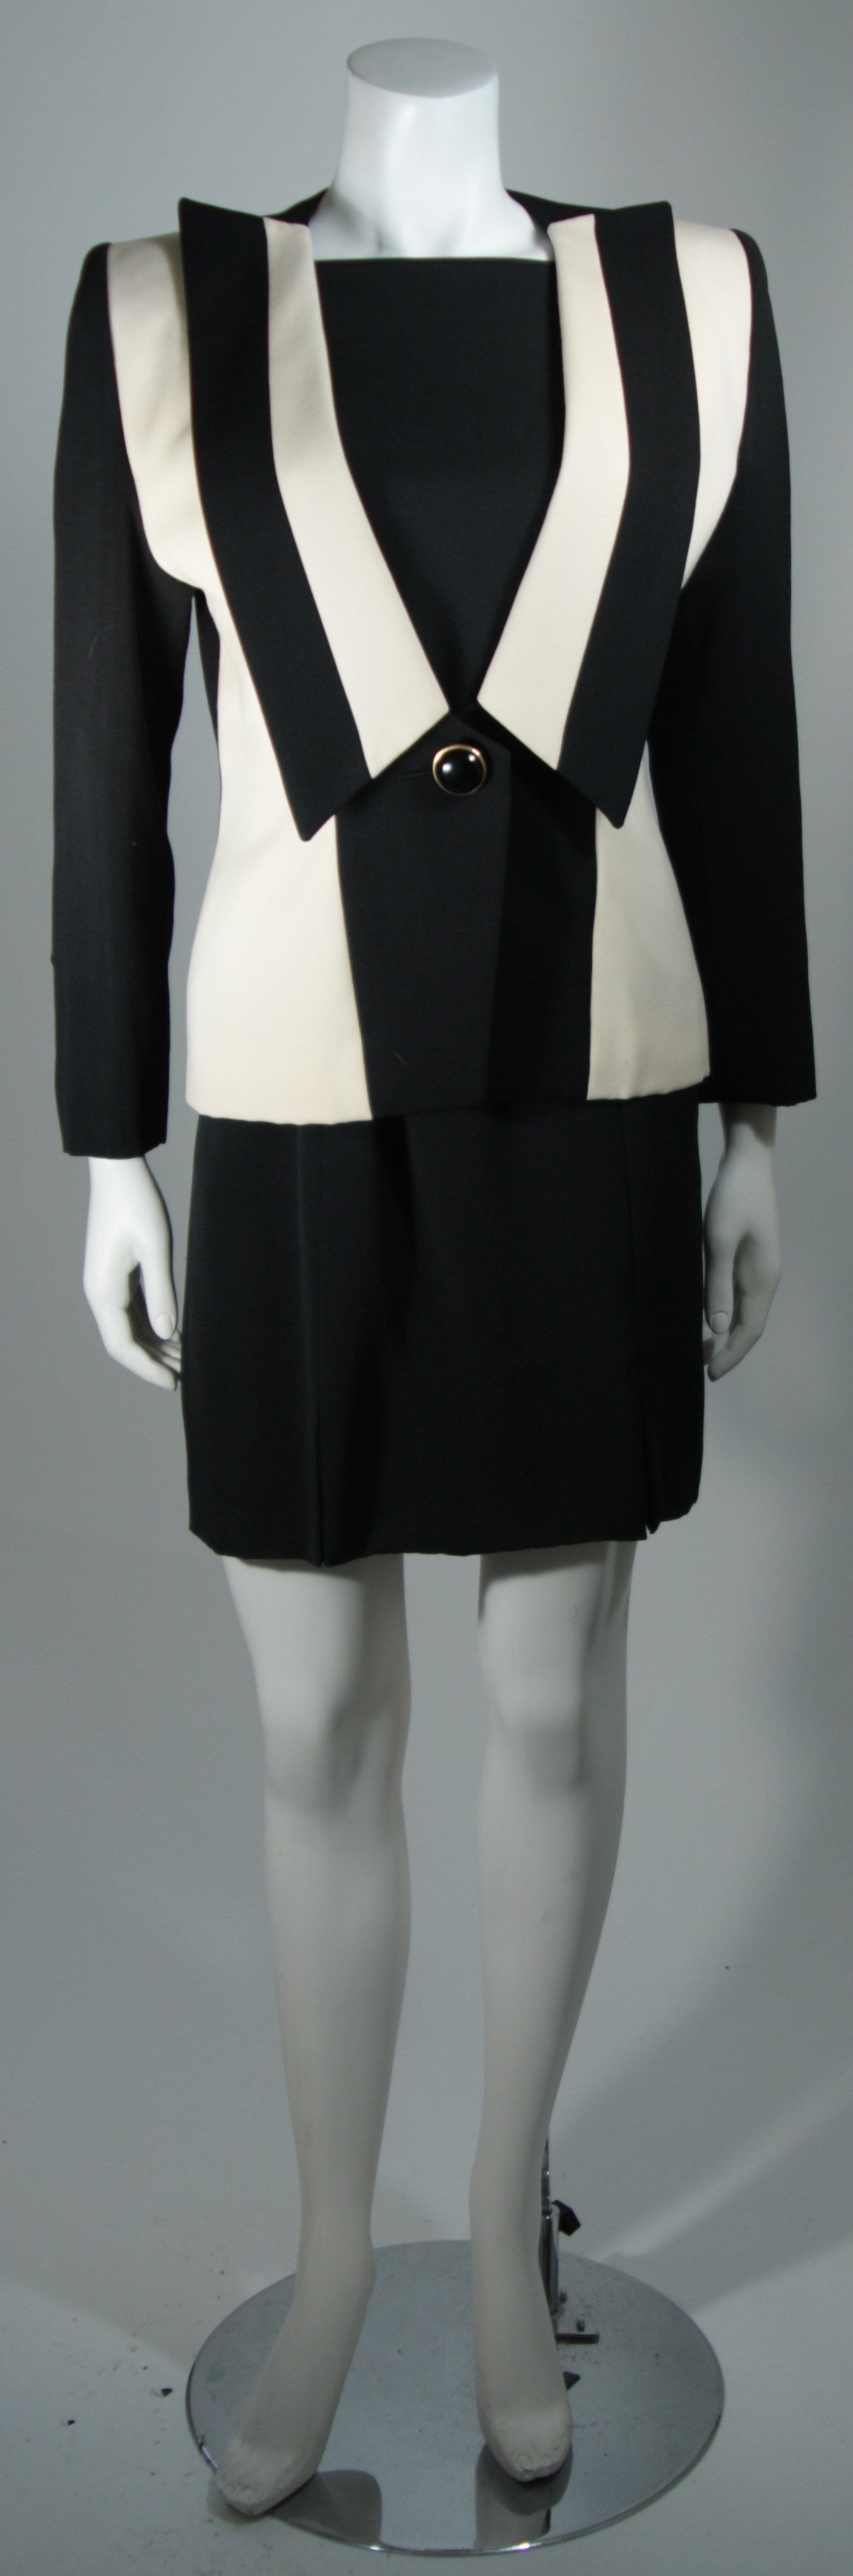 This Galanos Couture design is available for viewing at our Beverly Hills Boutique. We offer a large selection of evening gowns and luxury garments.

This suit jacket is composed of black and white contrasting wool and has a center front button